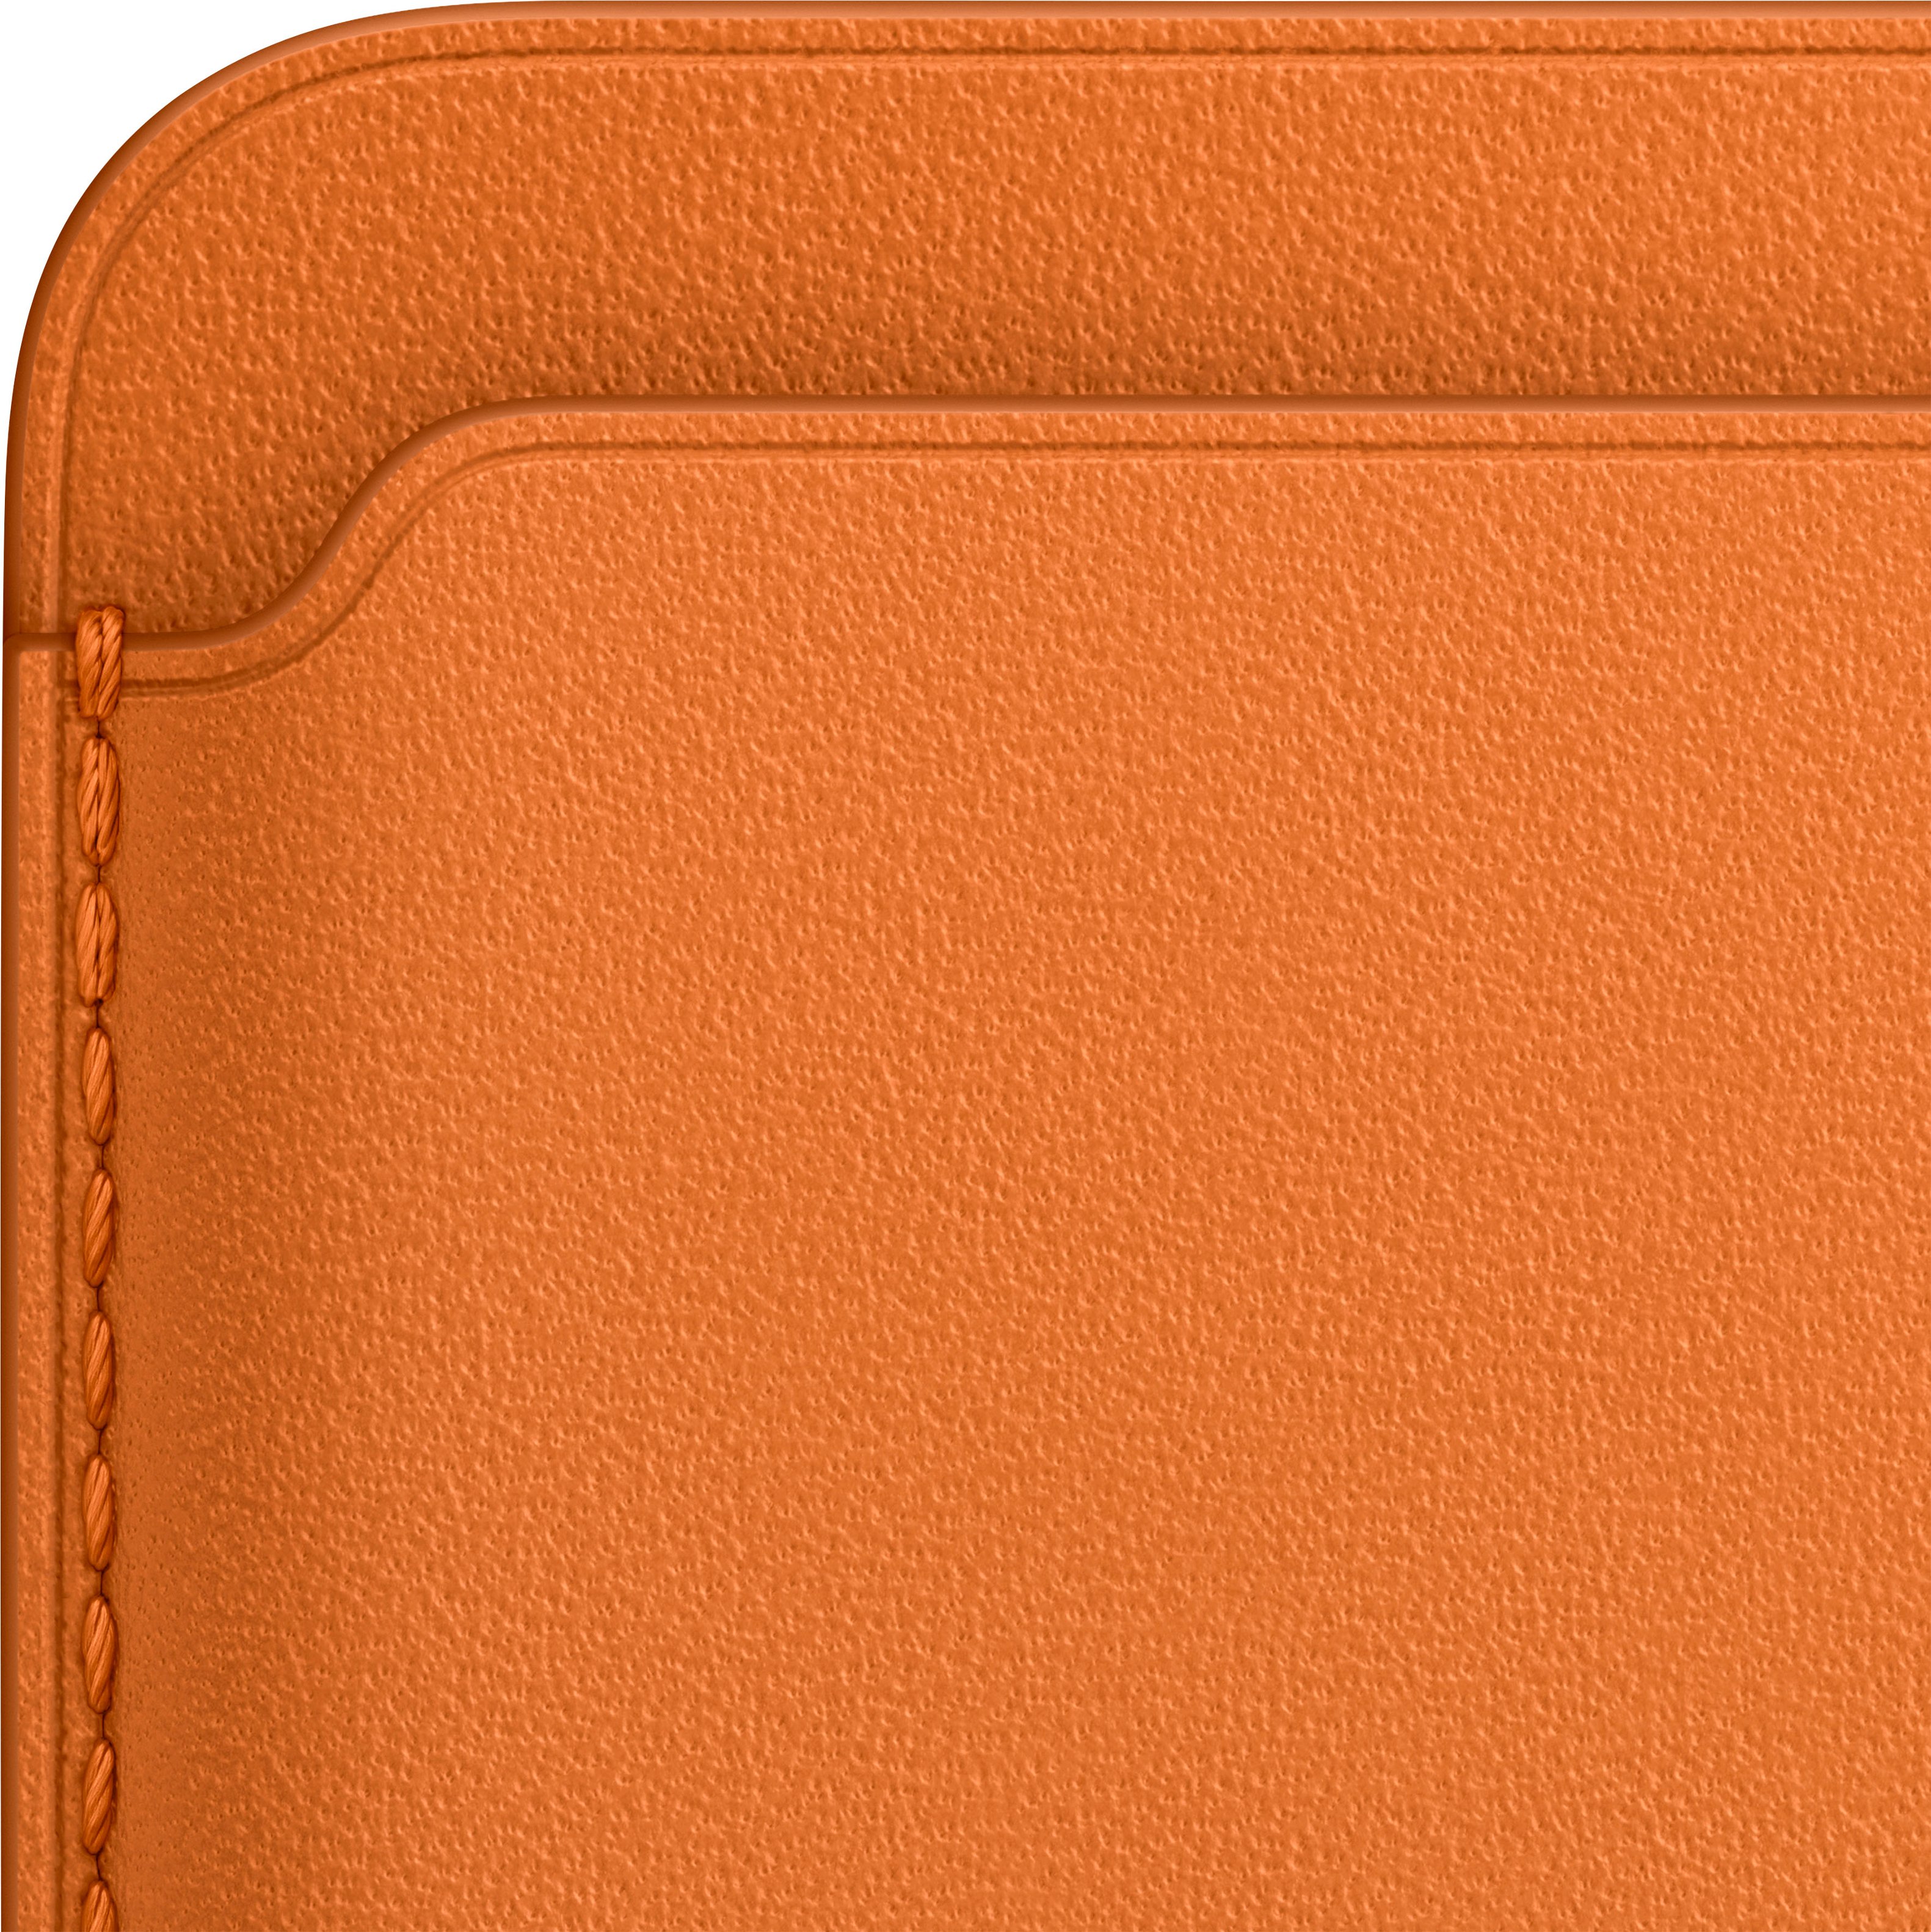 Apple Iphone Leather Wallet With Magsafe - Orange : Target